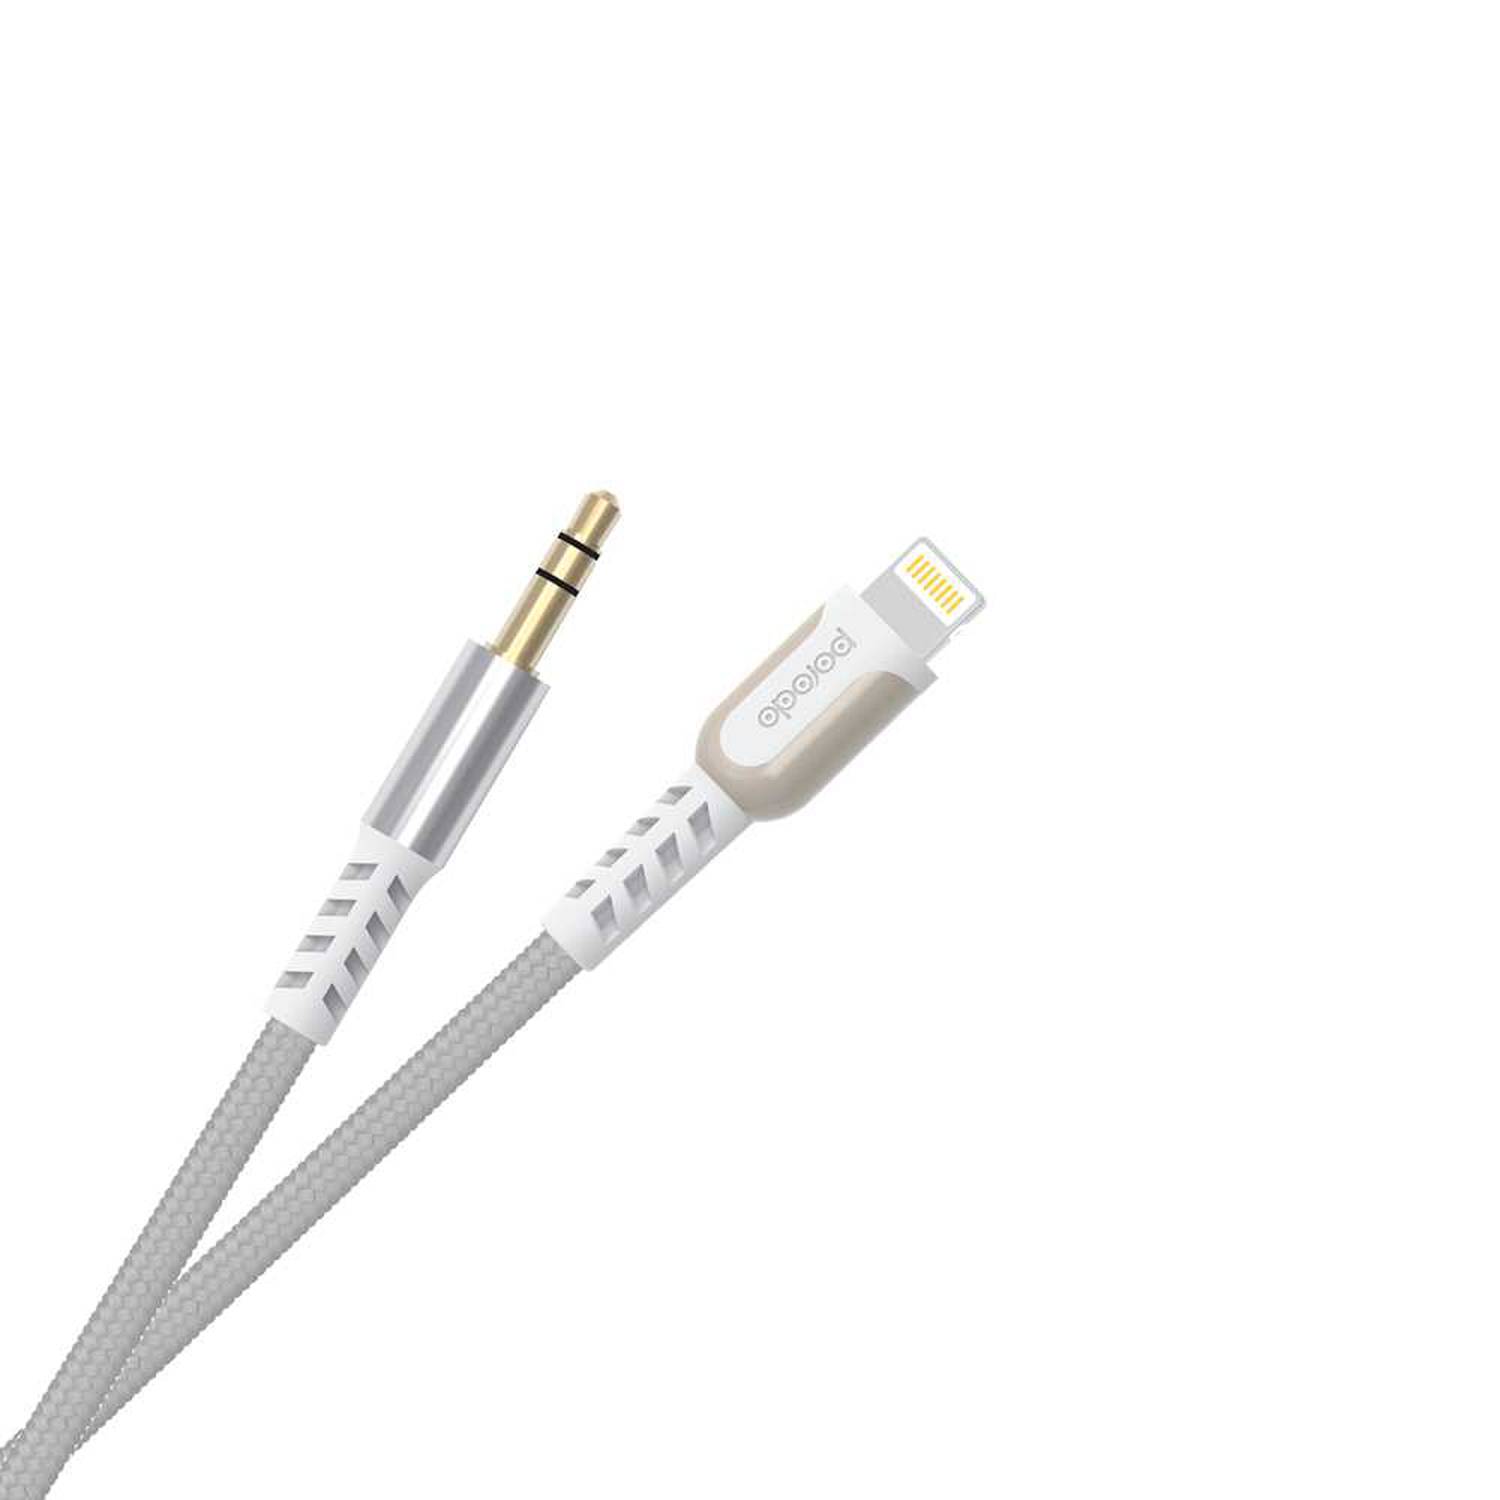 Lightning - 3.5 Mm Audio Cable (1.2m) - White